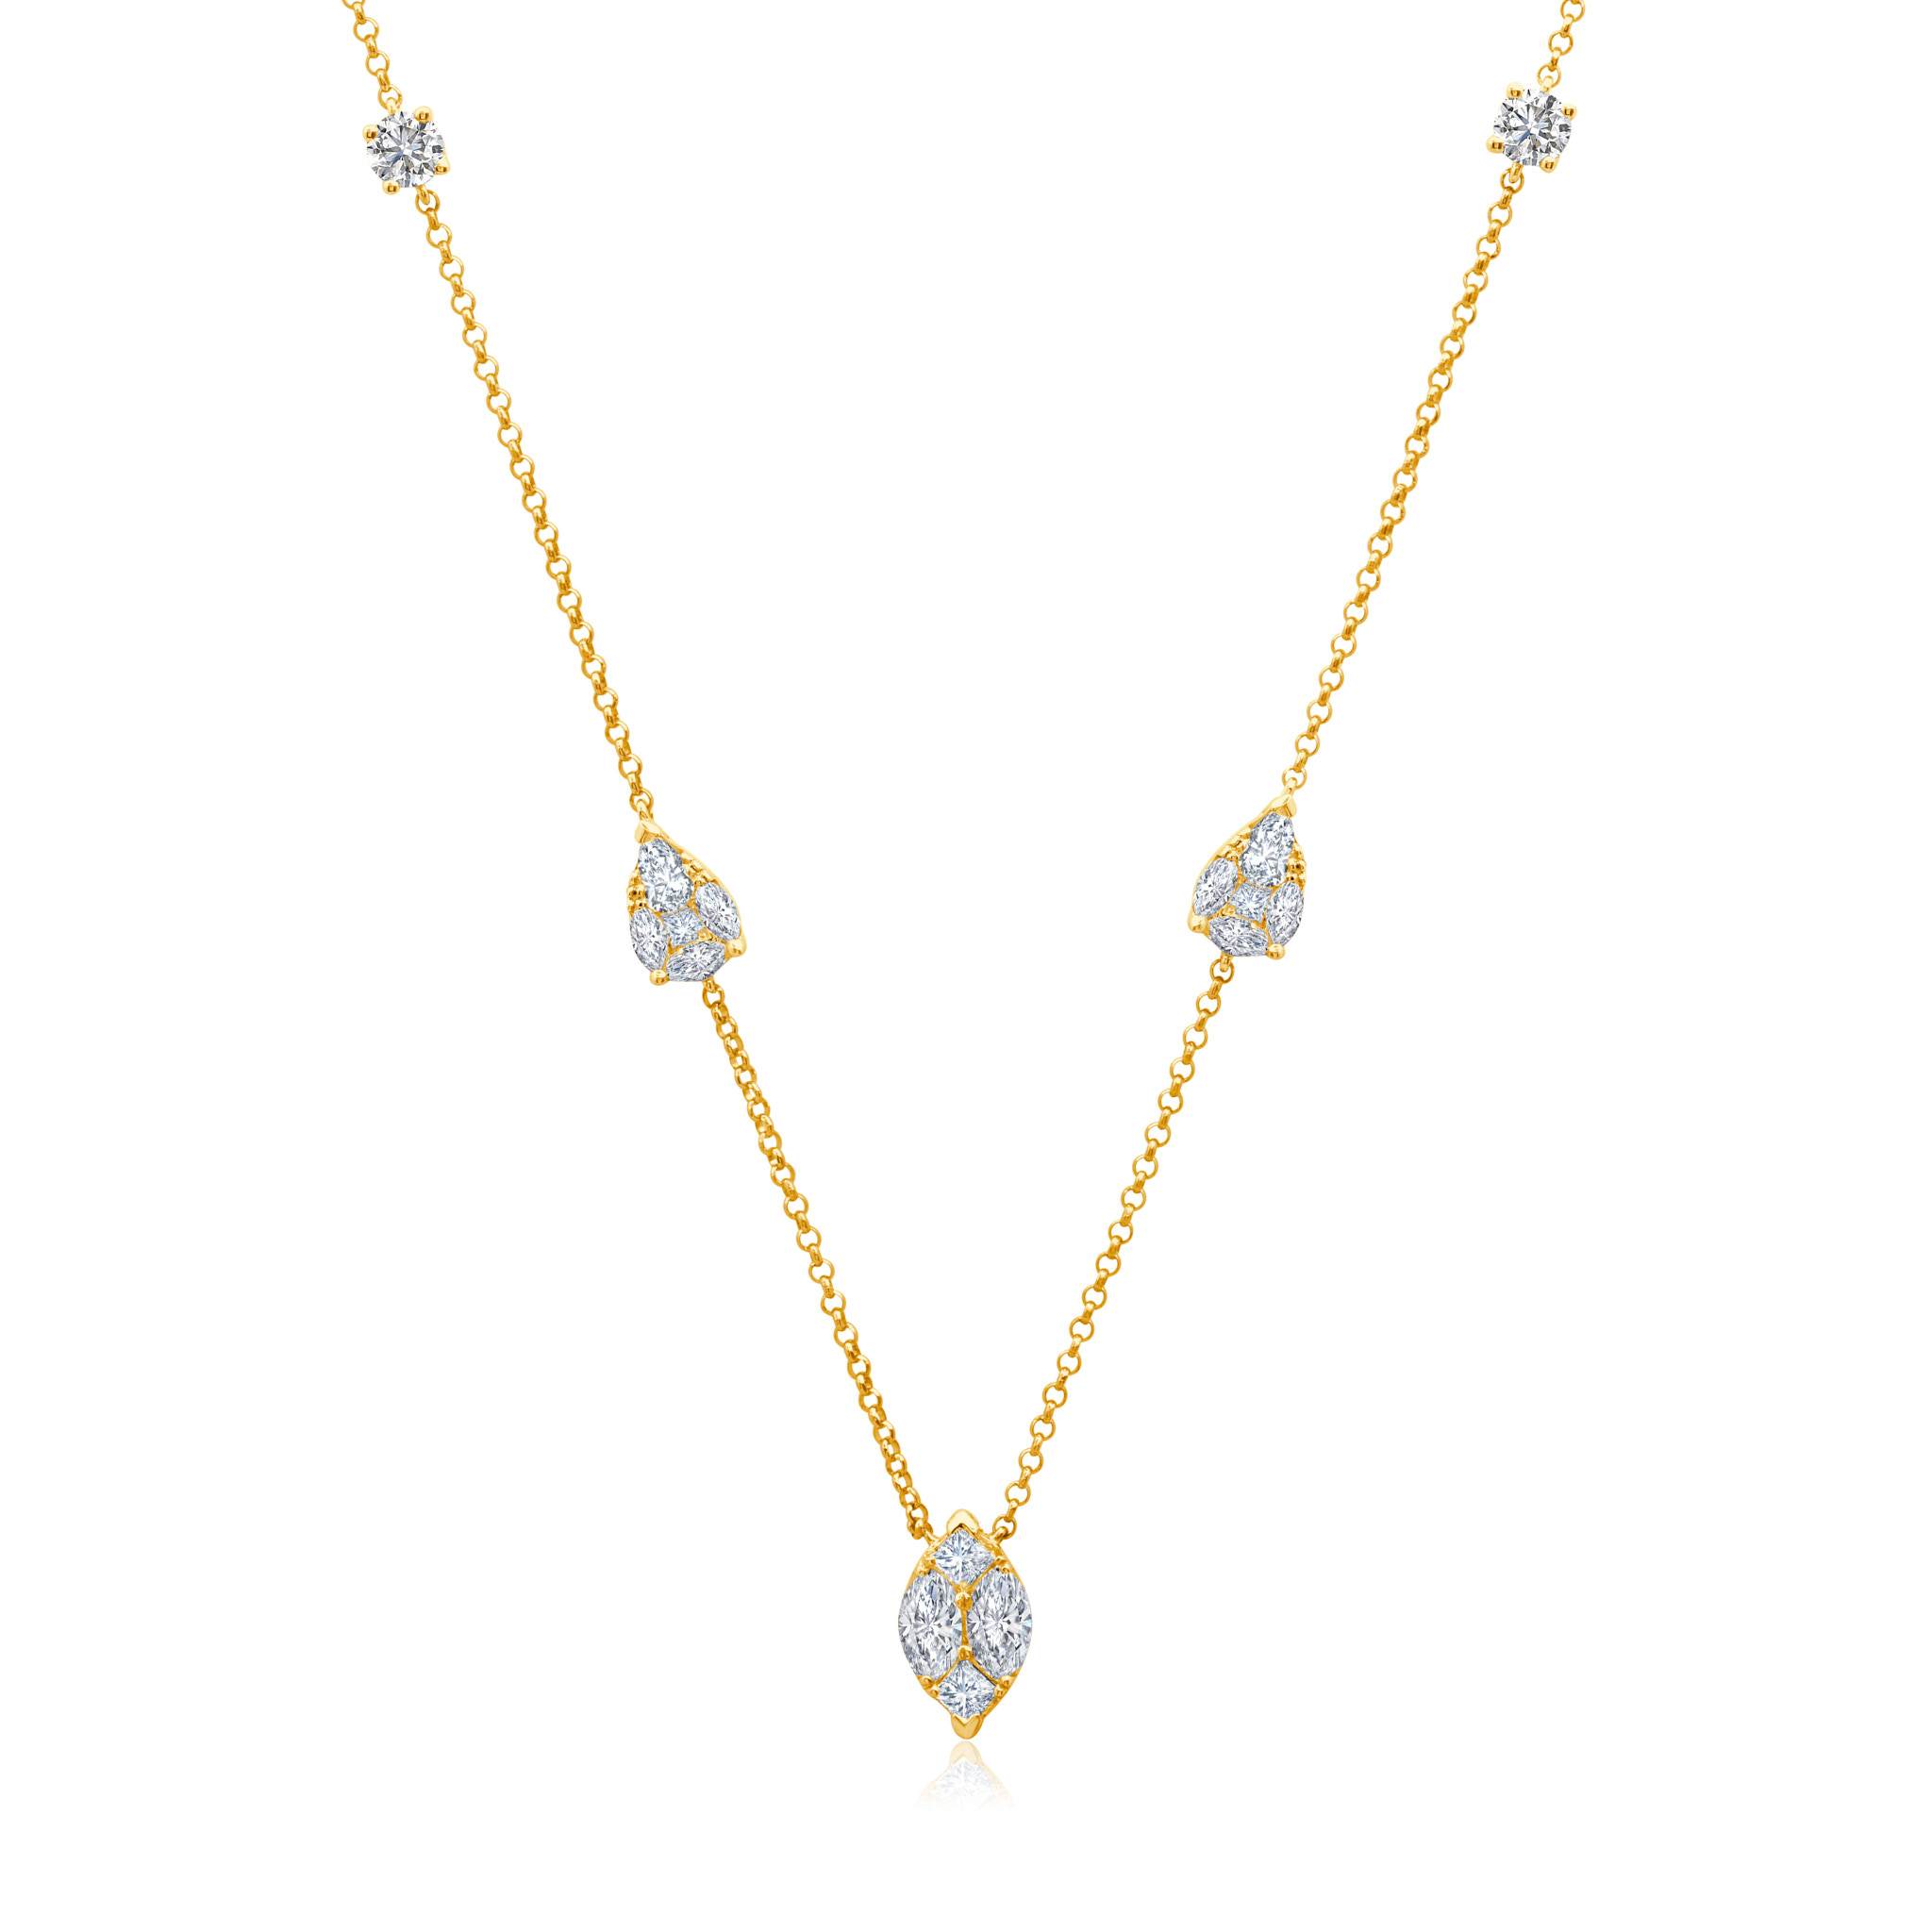 Graziela Gems - Necklace - Pear & Marquise Diamond Ascension Necklace - Yellow Gold